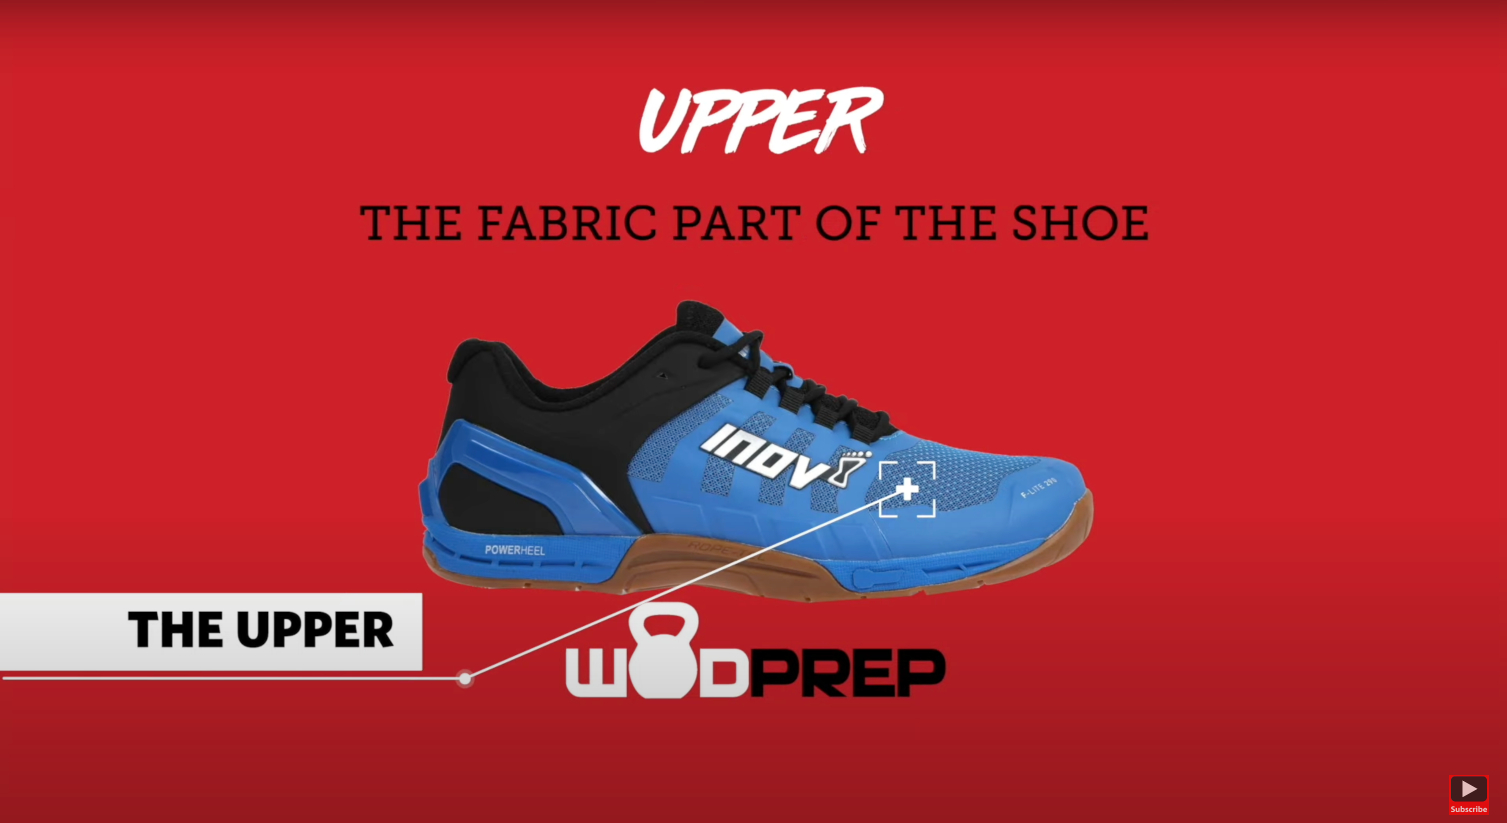 upper (the upper part of the shoe) for Crossfit sneakers